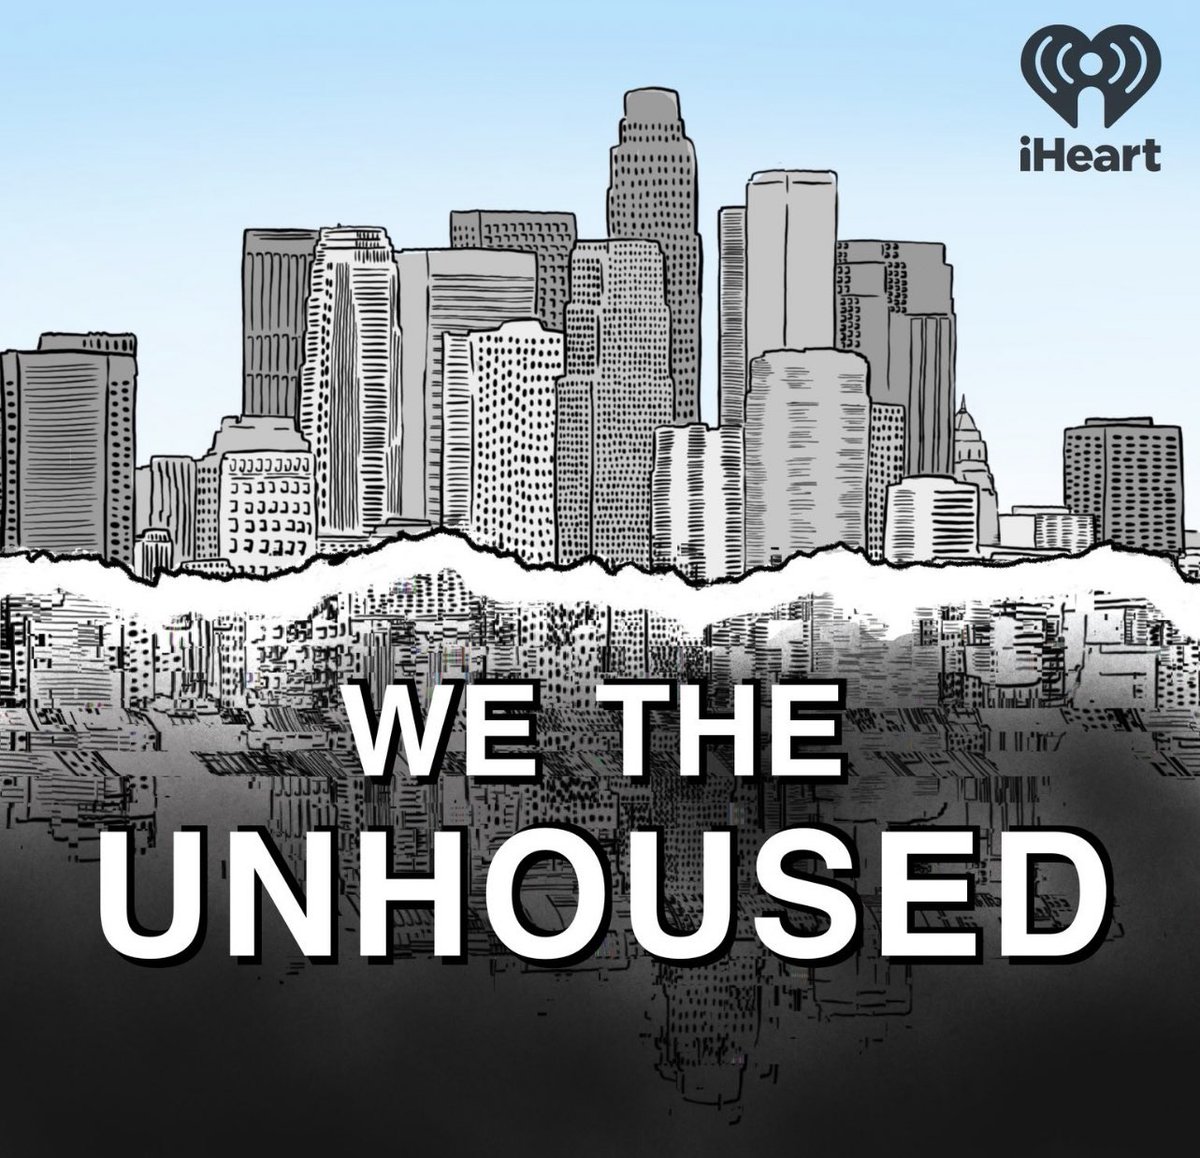 it’s here! working with creator, writer, activist & host @TheoHen95302259 to relaunch his incredible pod ‘we the unhoused’ has been a highlight of the year. starting december 5, theo will continue centering voices of the unhoused. our trailer is below ☀️ open.spotify.com/show/0ulOwidMk…